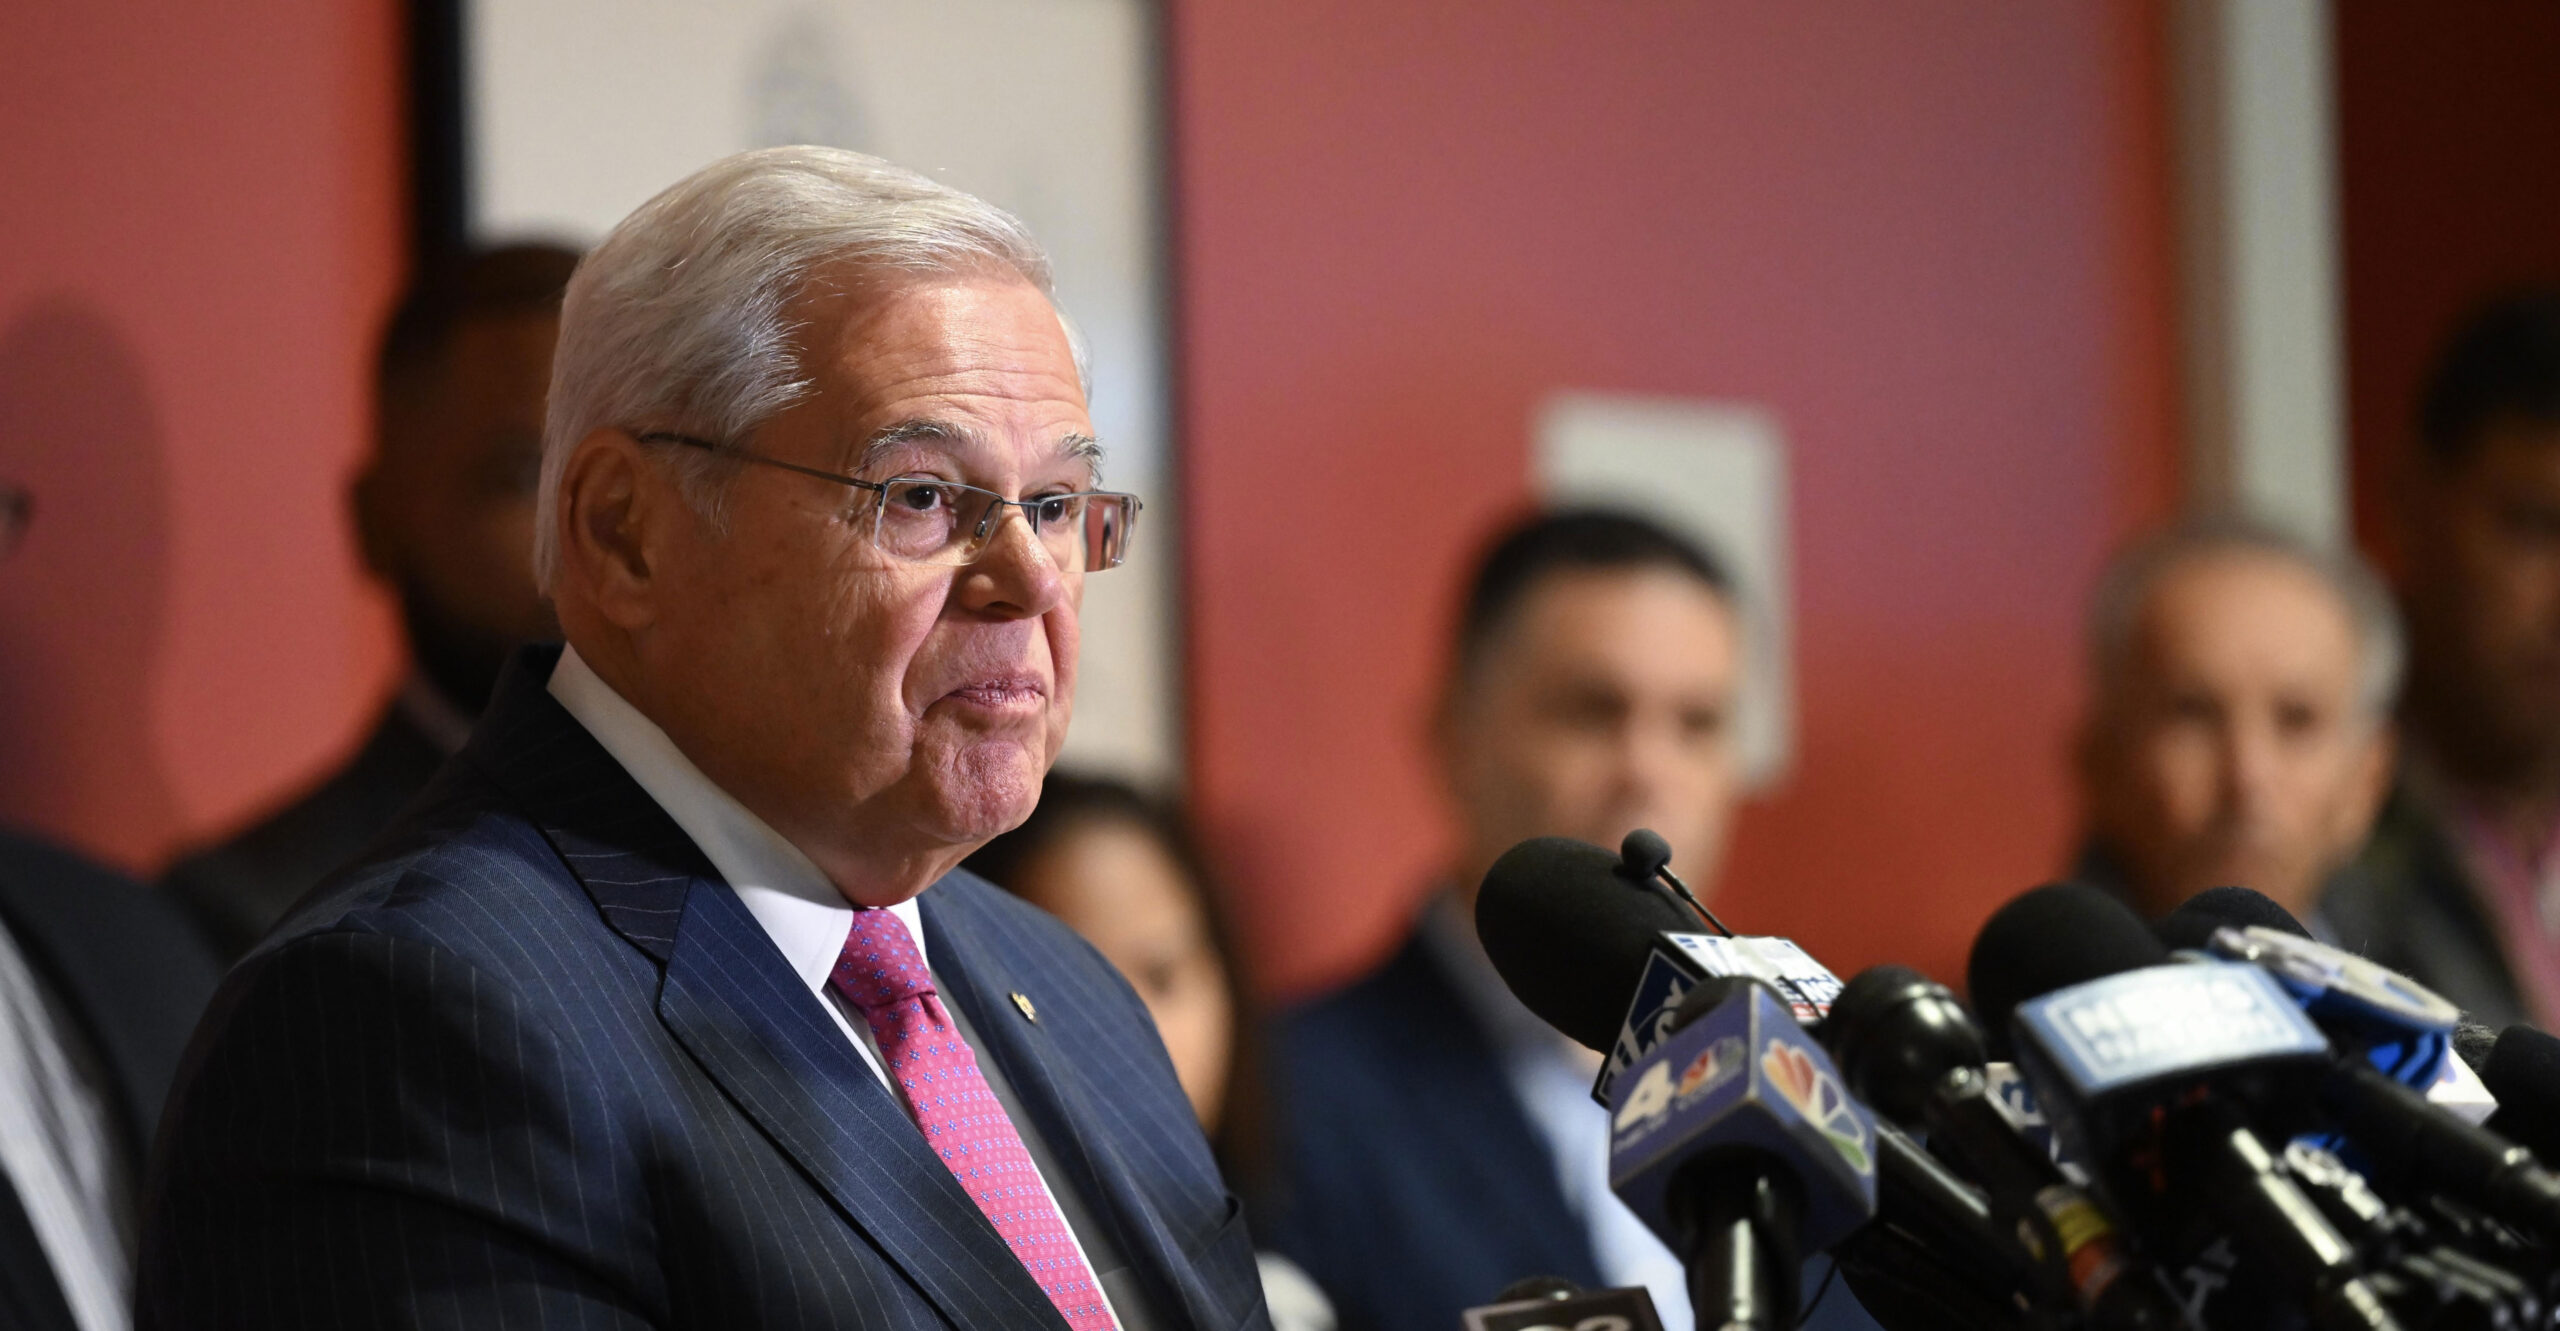 For NJ's Menendez, New Corruption Charges Are Deja Vu All Over Again